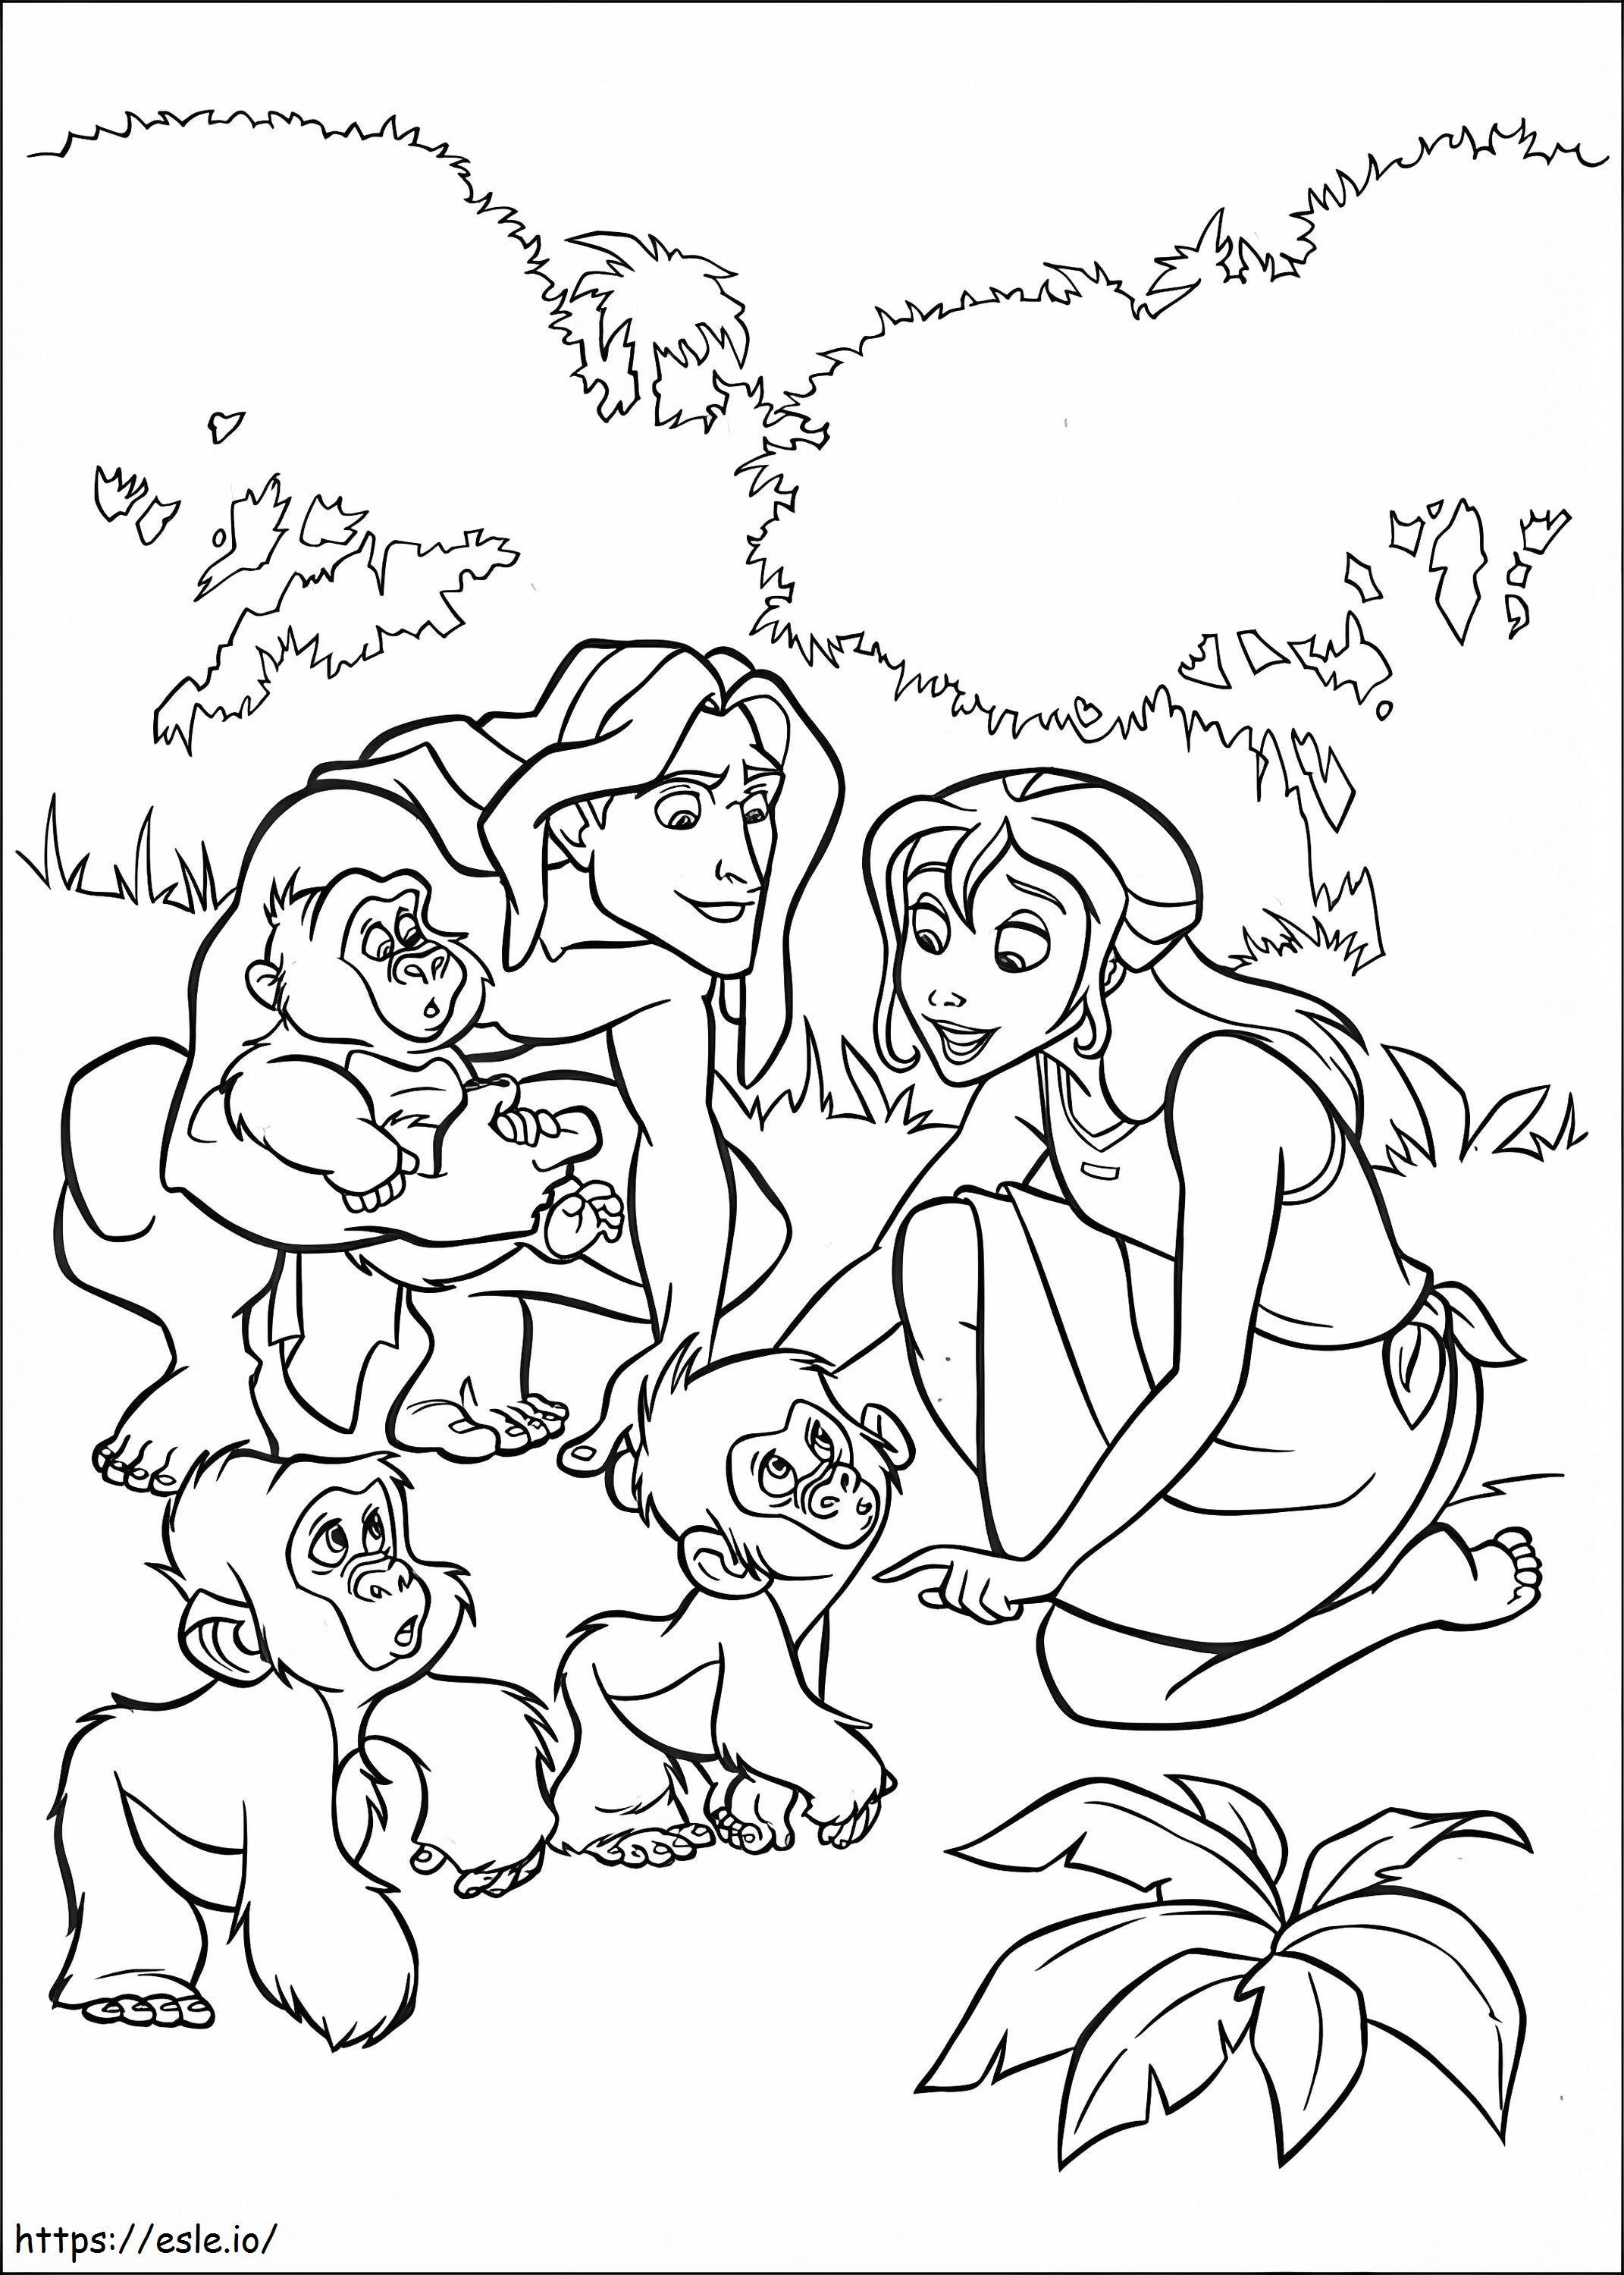 Tarzan And Jane Porter With Baby Monkeys coloring page